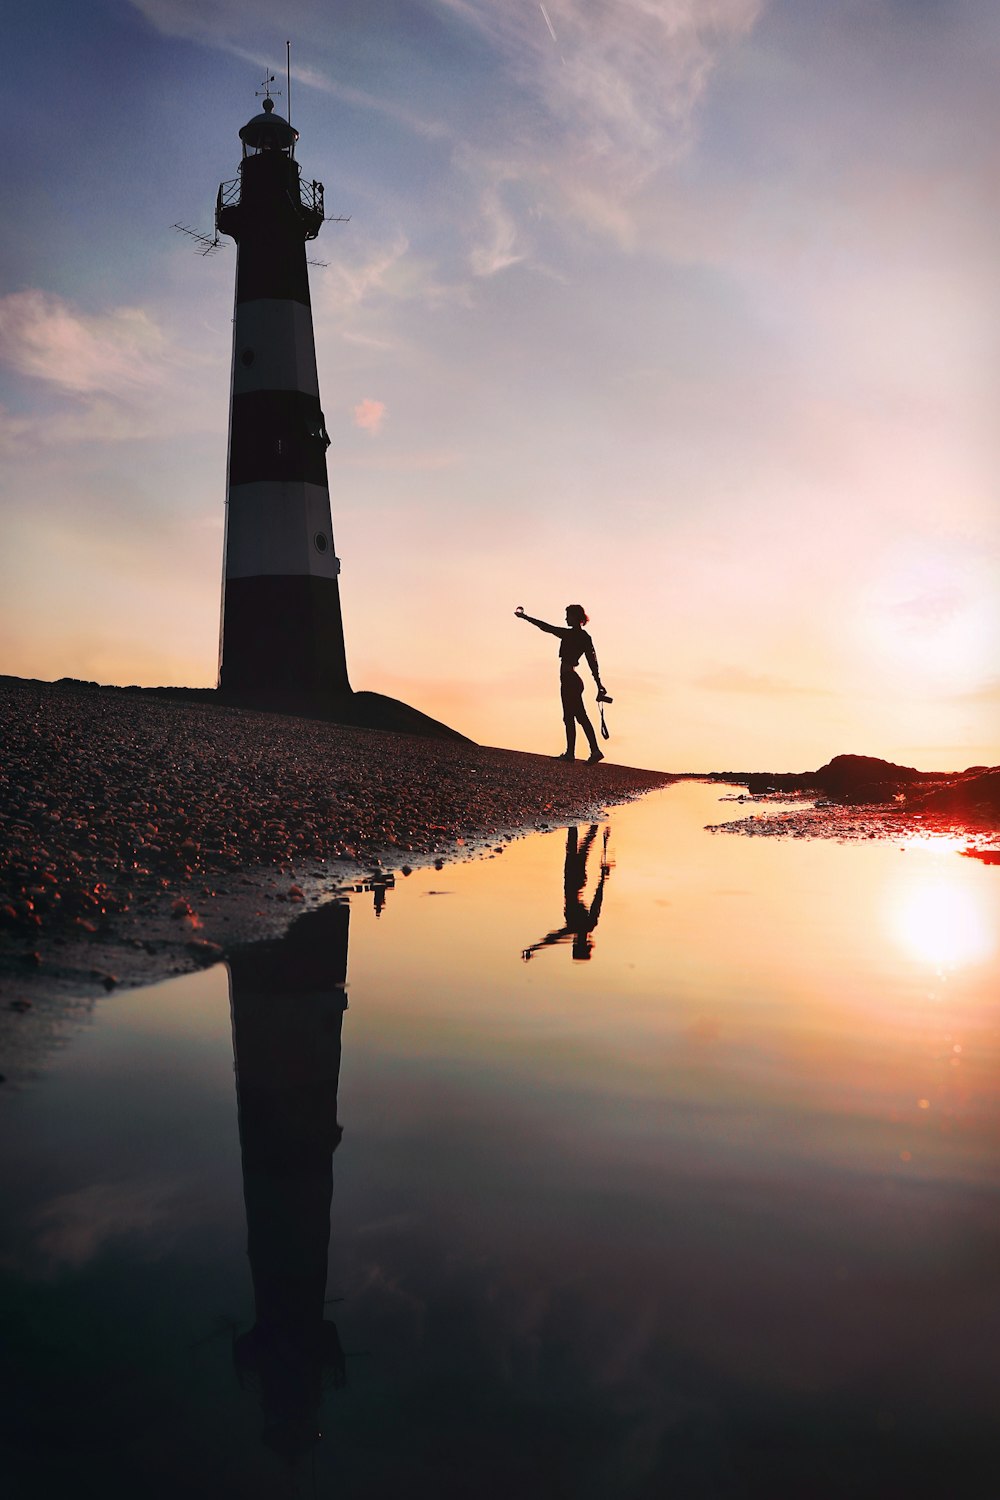 a person standing on a surfboard in front of a lighthouse